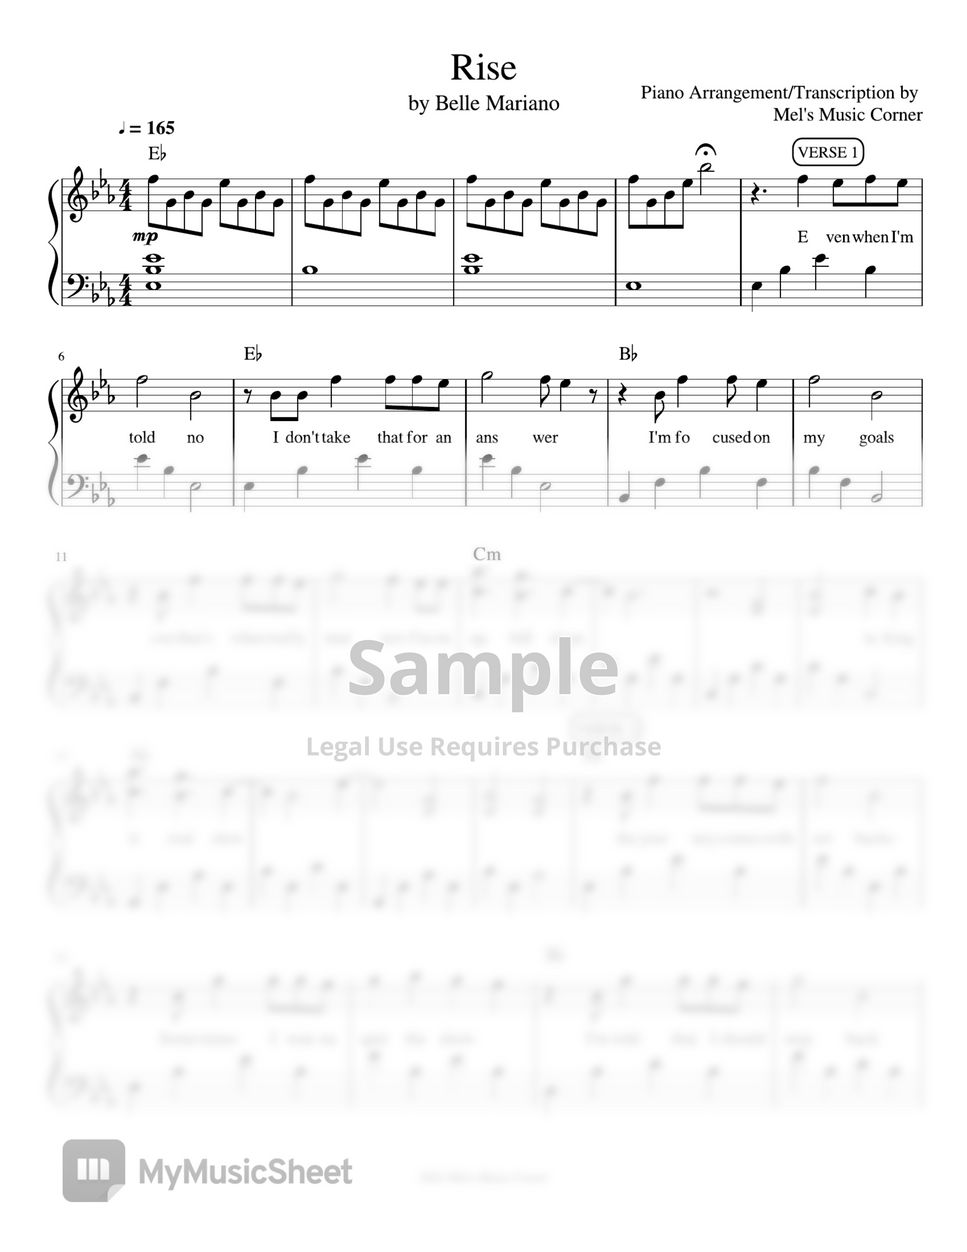 Belle Mariano - Rise (piano sheet music) by Mel's Music Corner